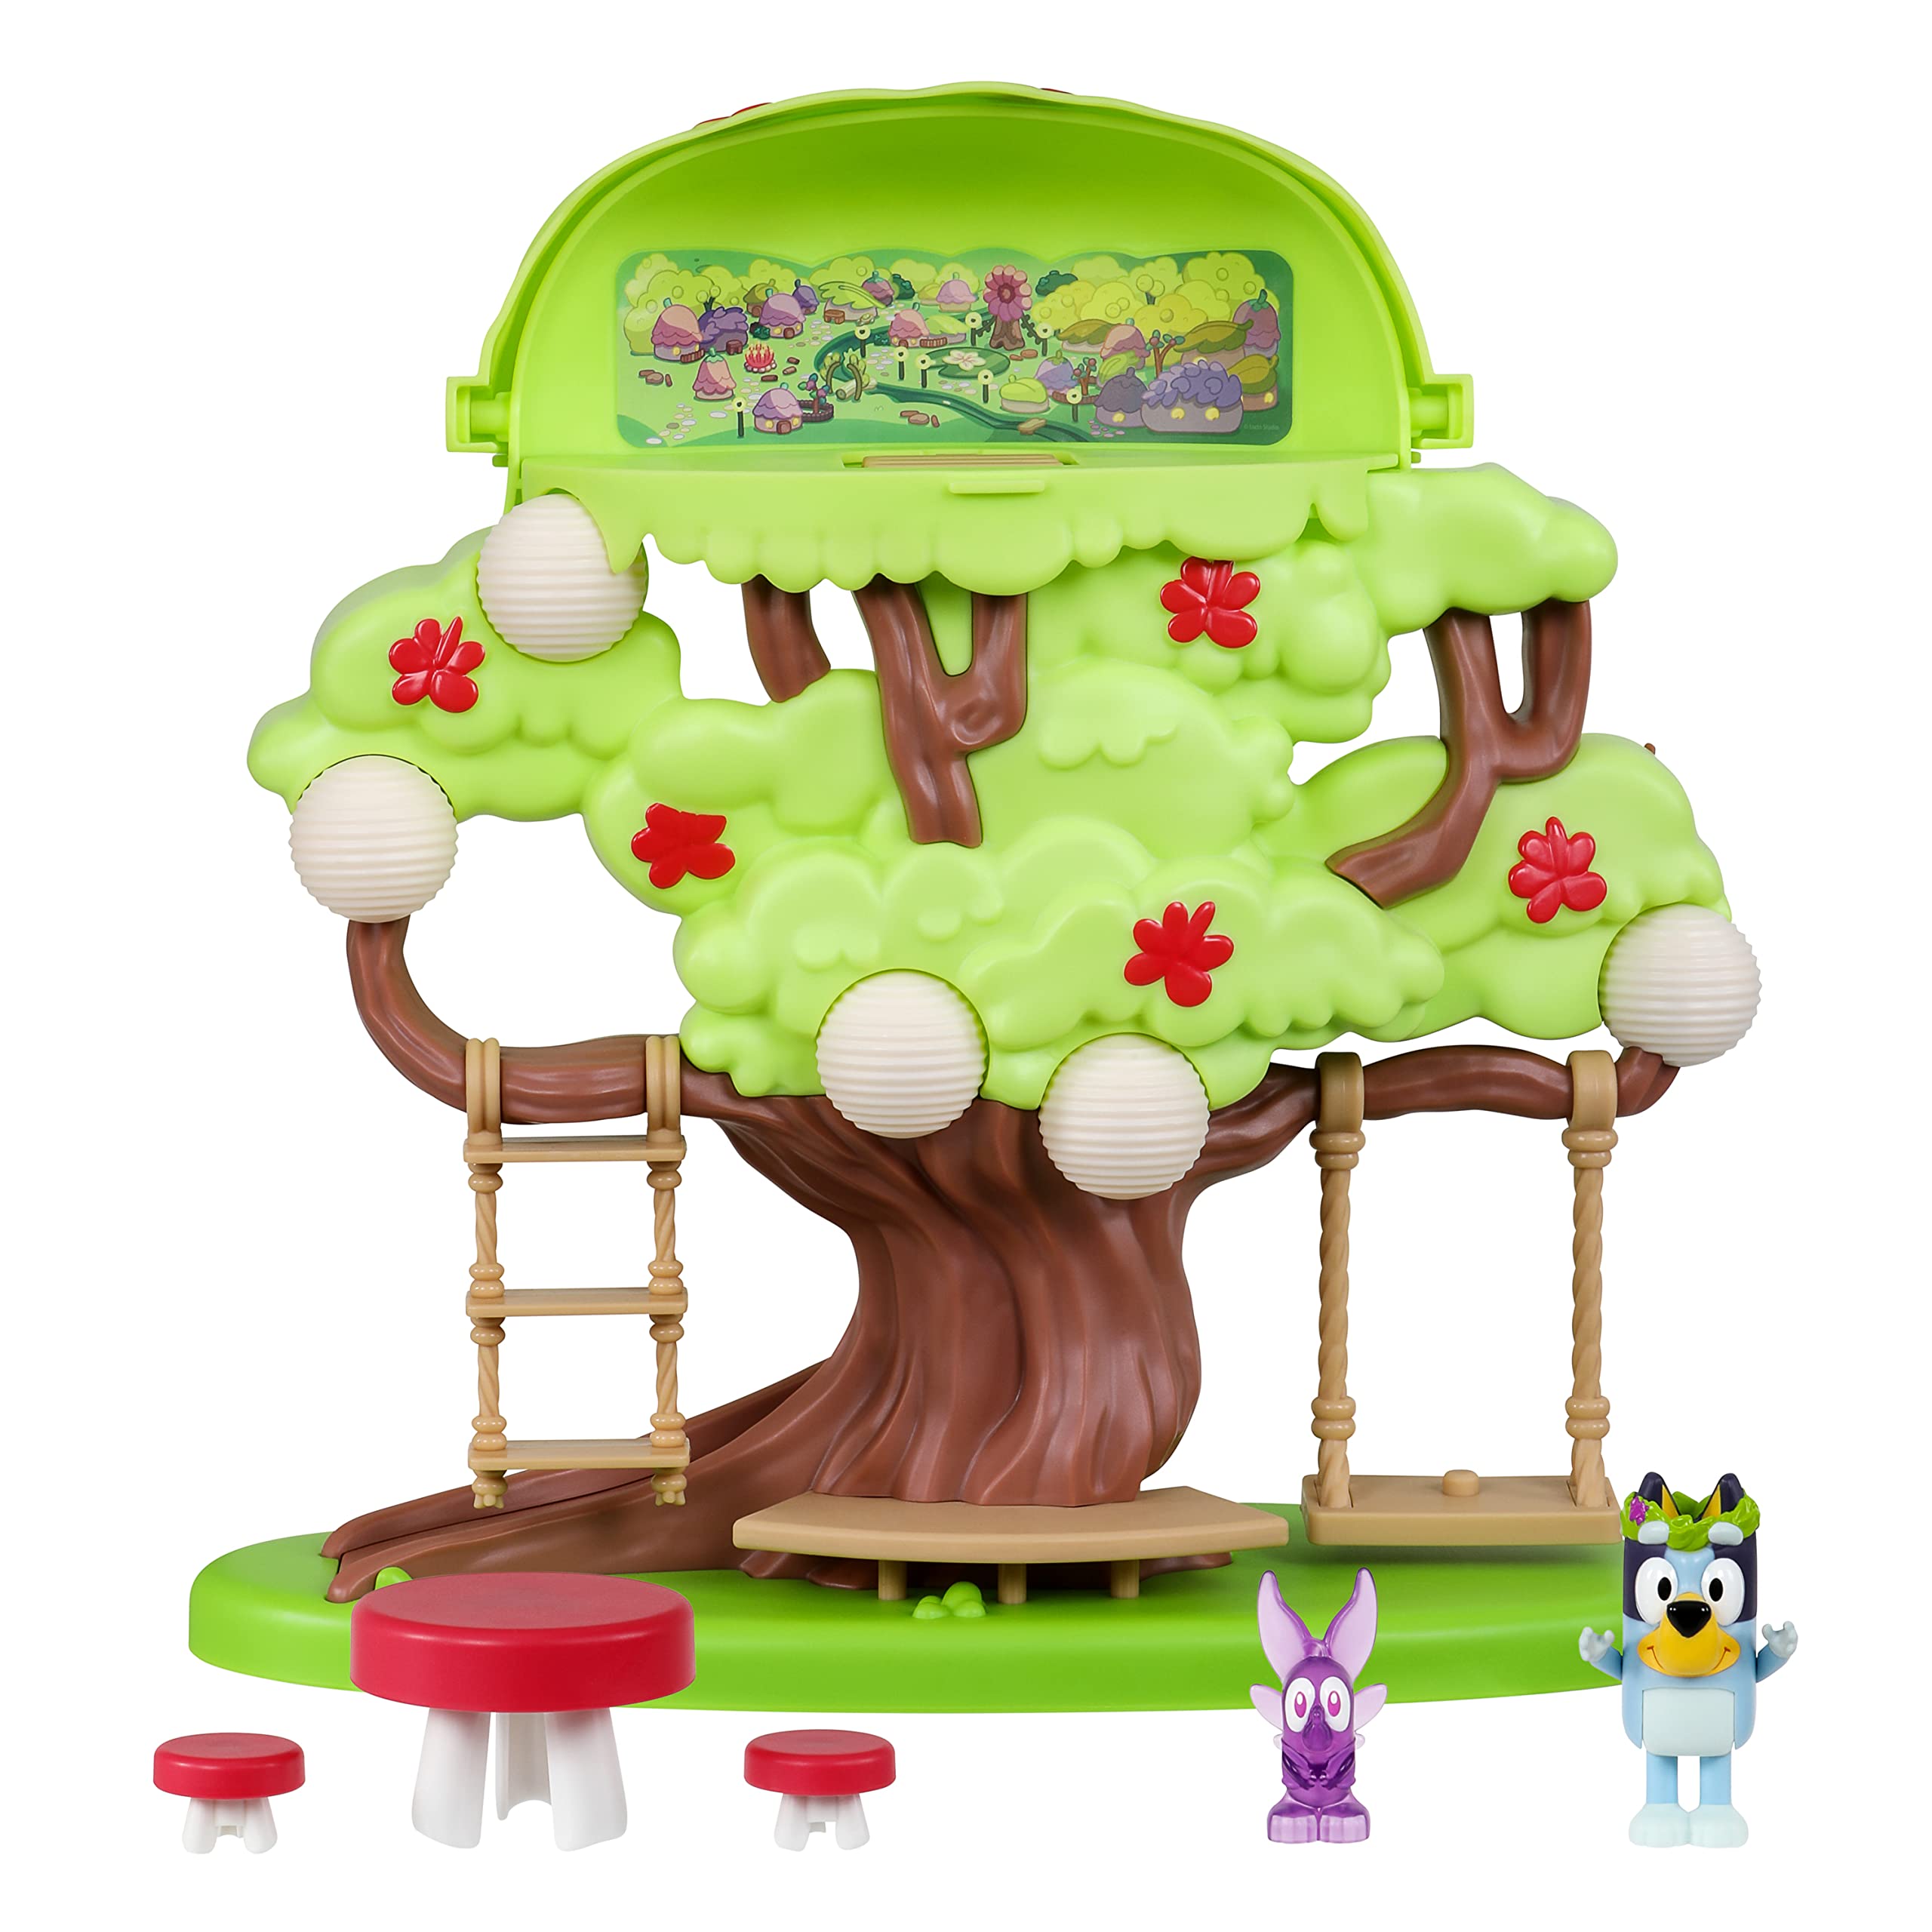 Bluey Tree Playset with Secret Hideaway, Flower Crown and Fairy Figures and Accessories